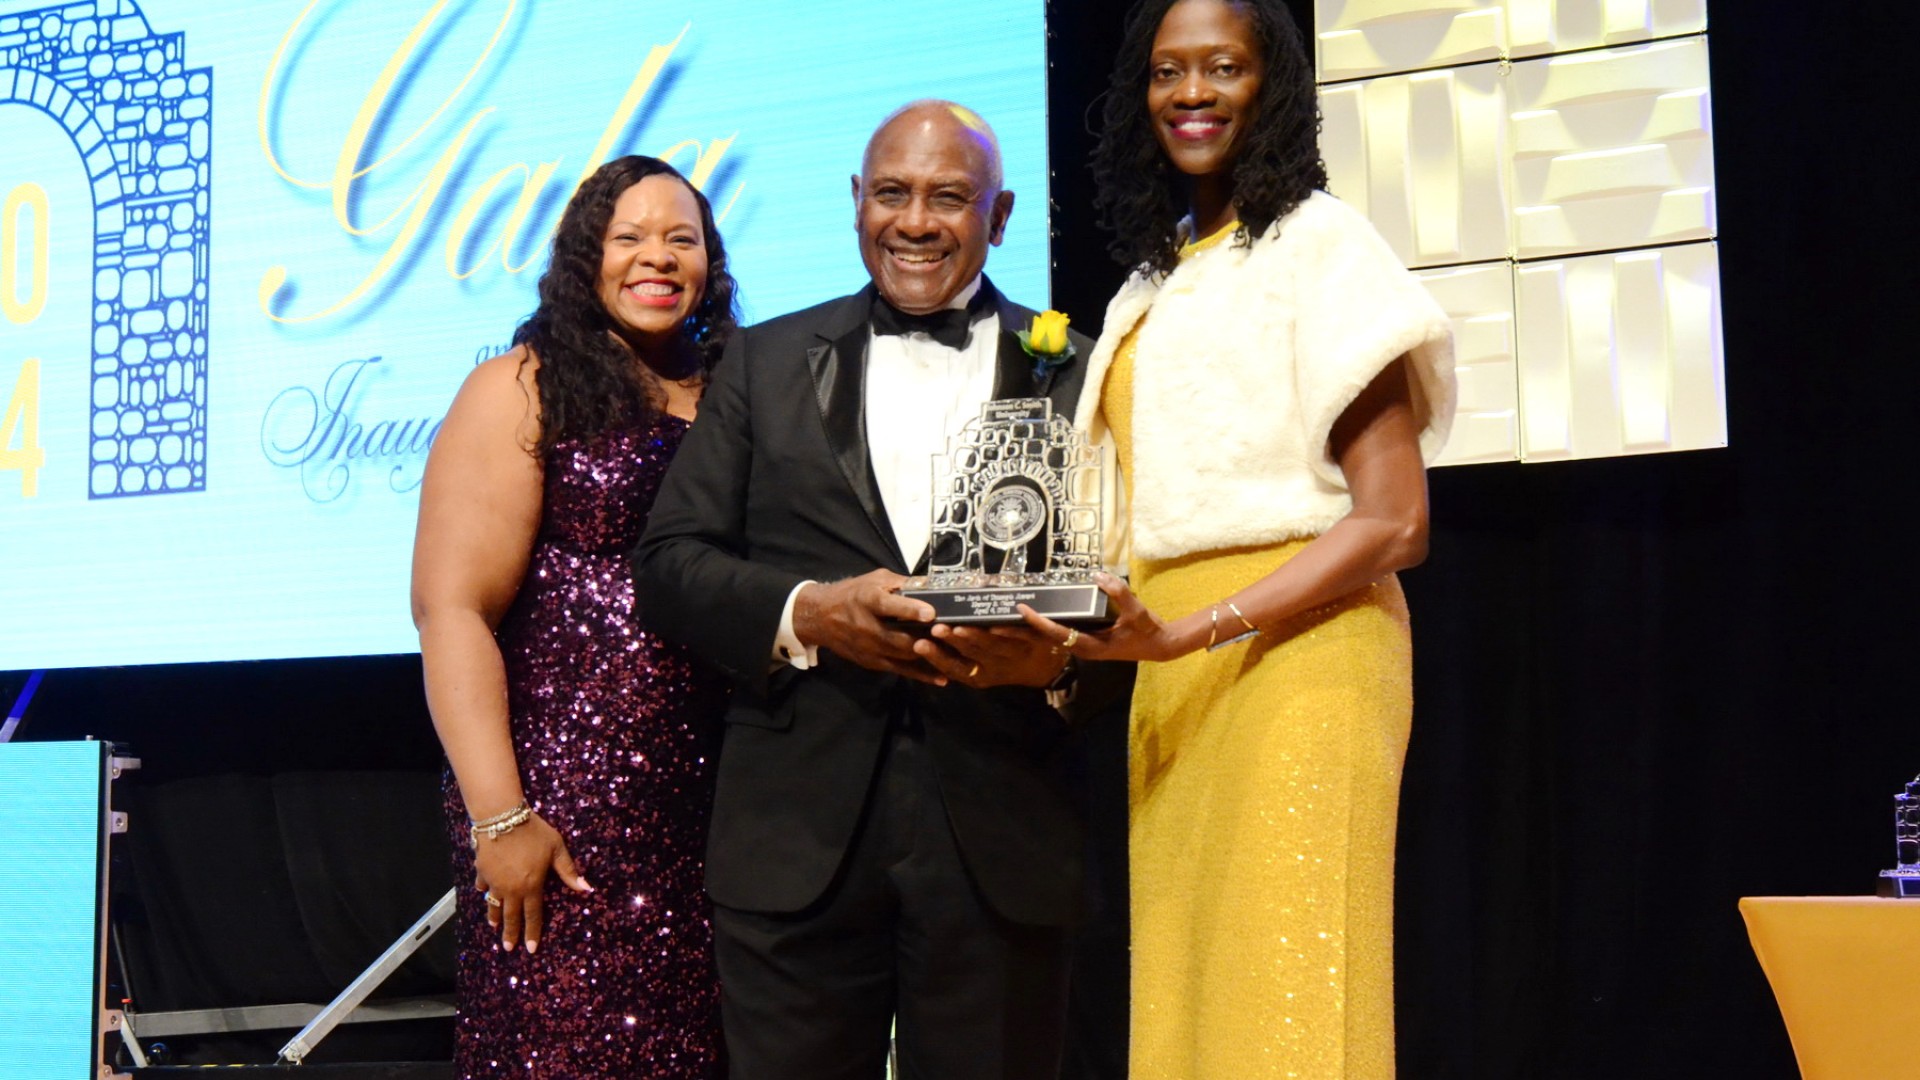 Harvey Gantt was presented with the Arch of Triumph Award.